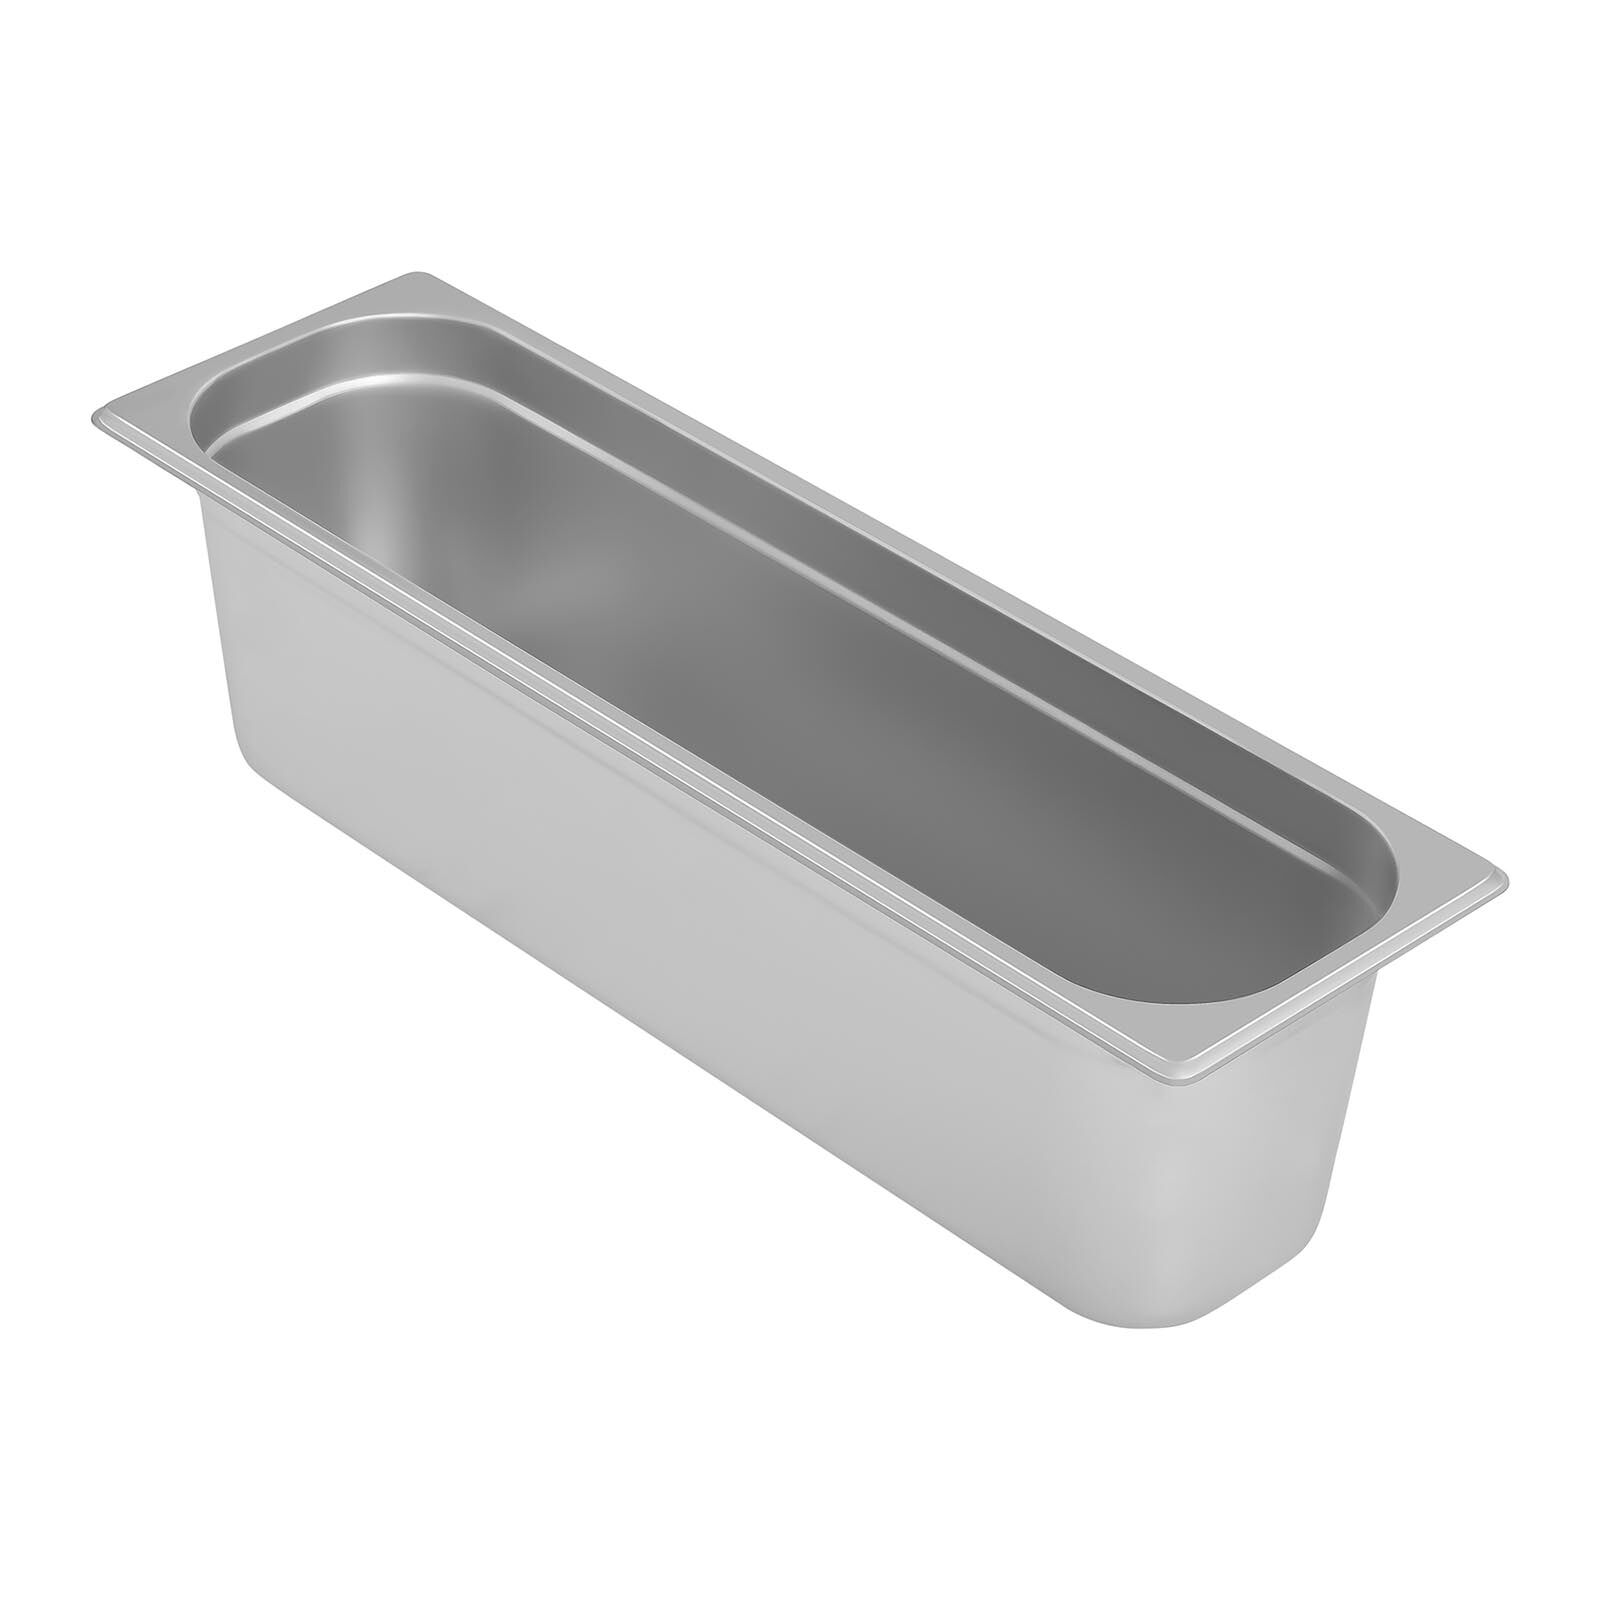 Royal Catering Gastronorm Tray - 2/4 - 150 mm RCGN-2/4X150